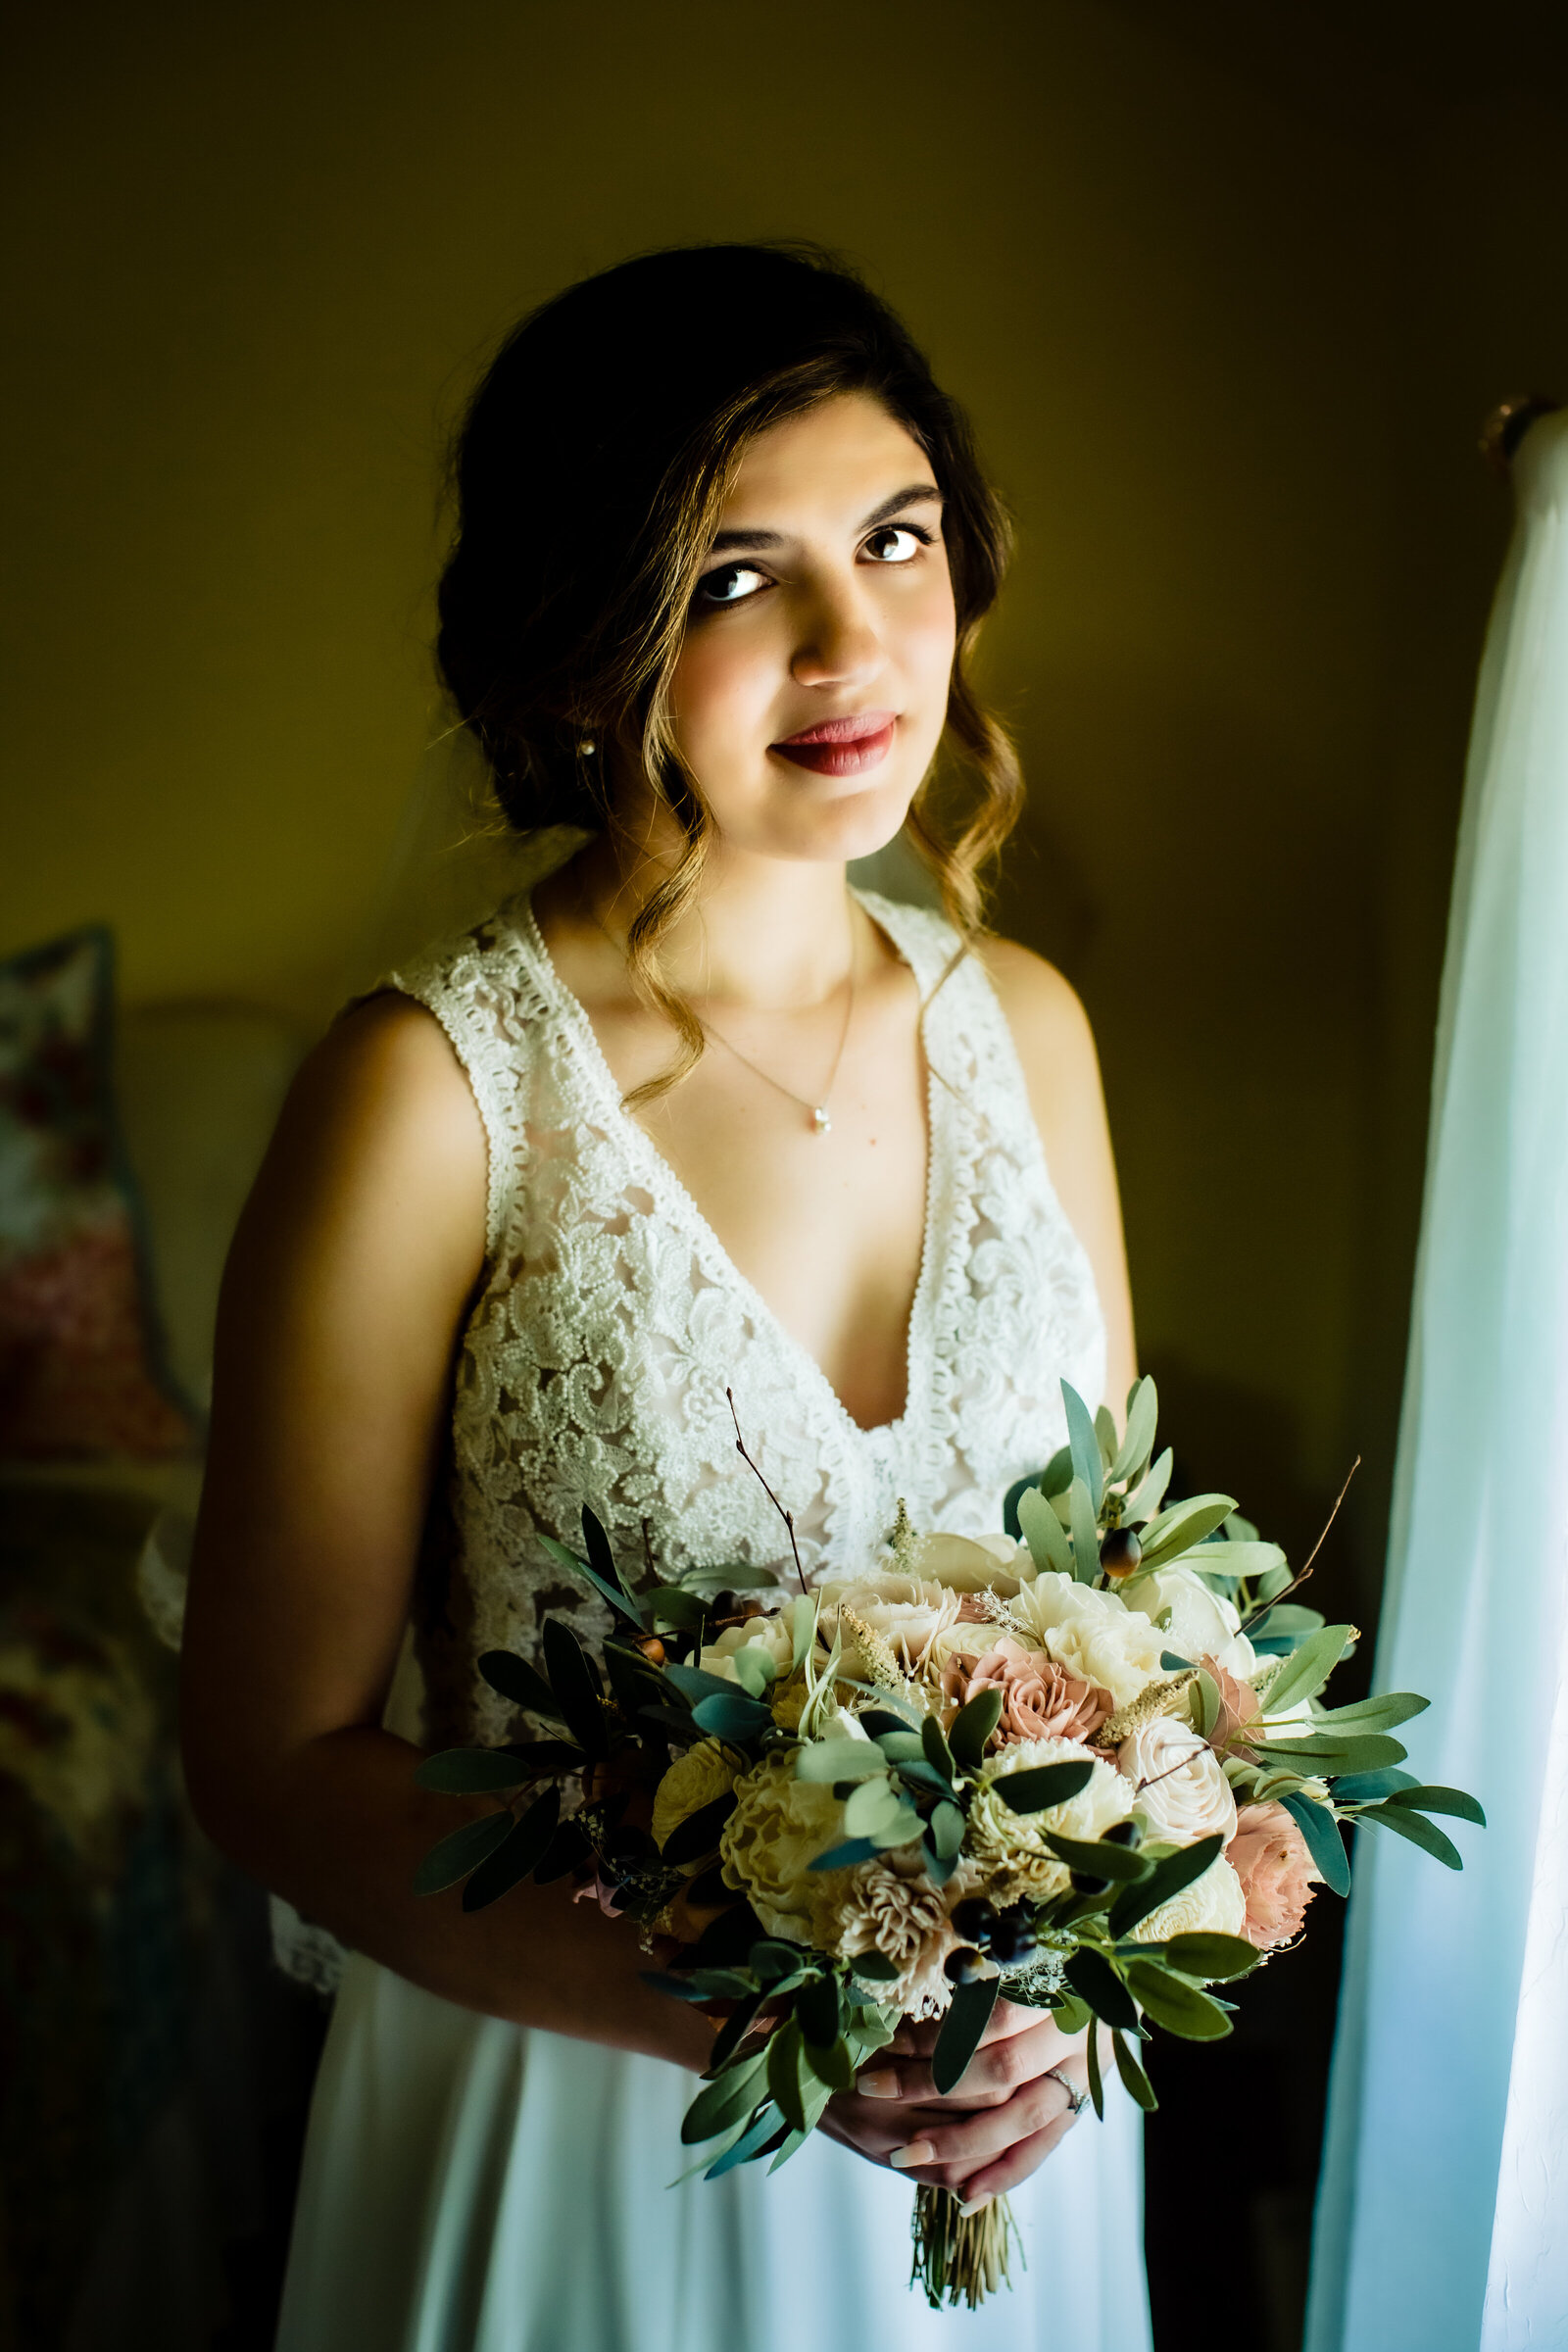 Bride looking at camera with her bouquet